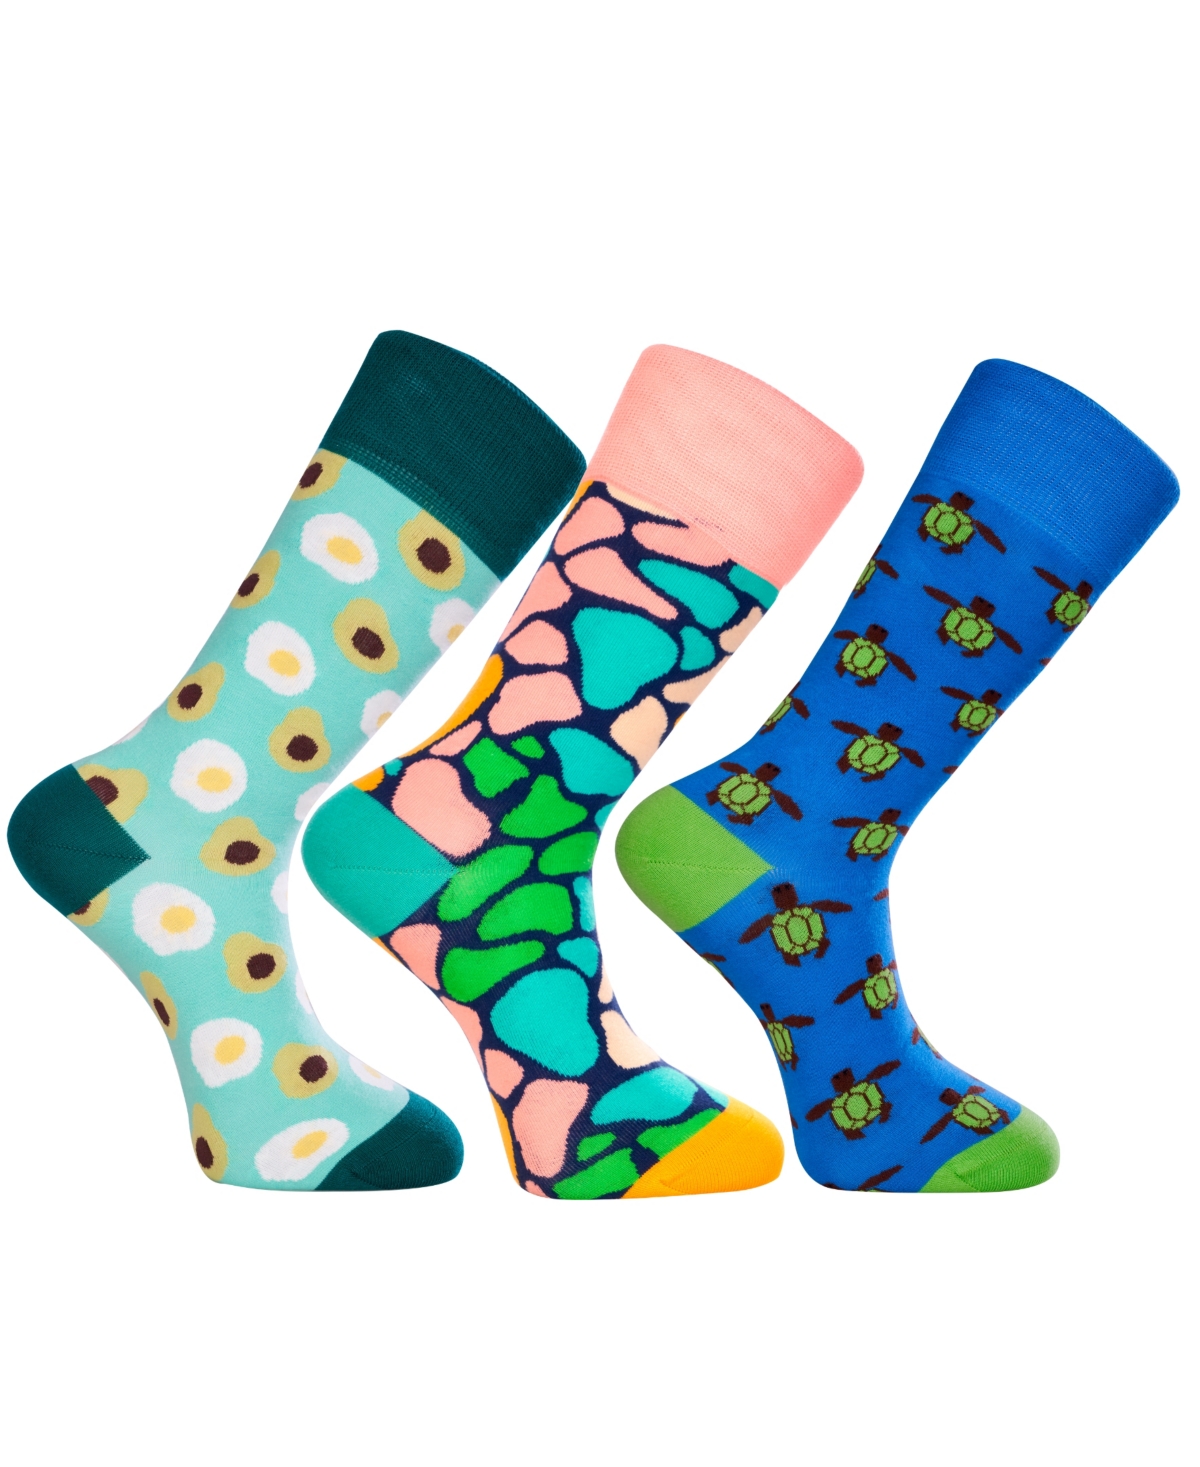 Men's Cancun Novelty Luxury Crew Socks Bundle Fun Colorful with Seamless Toe Design, Pack of 3 - Multi Color